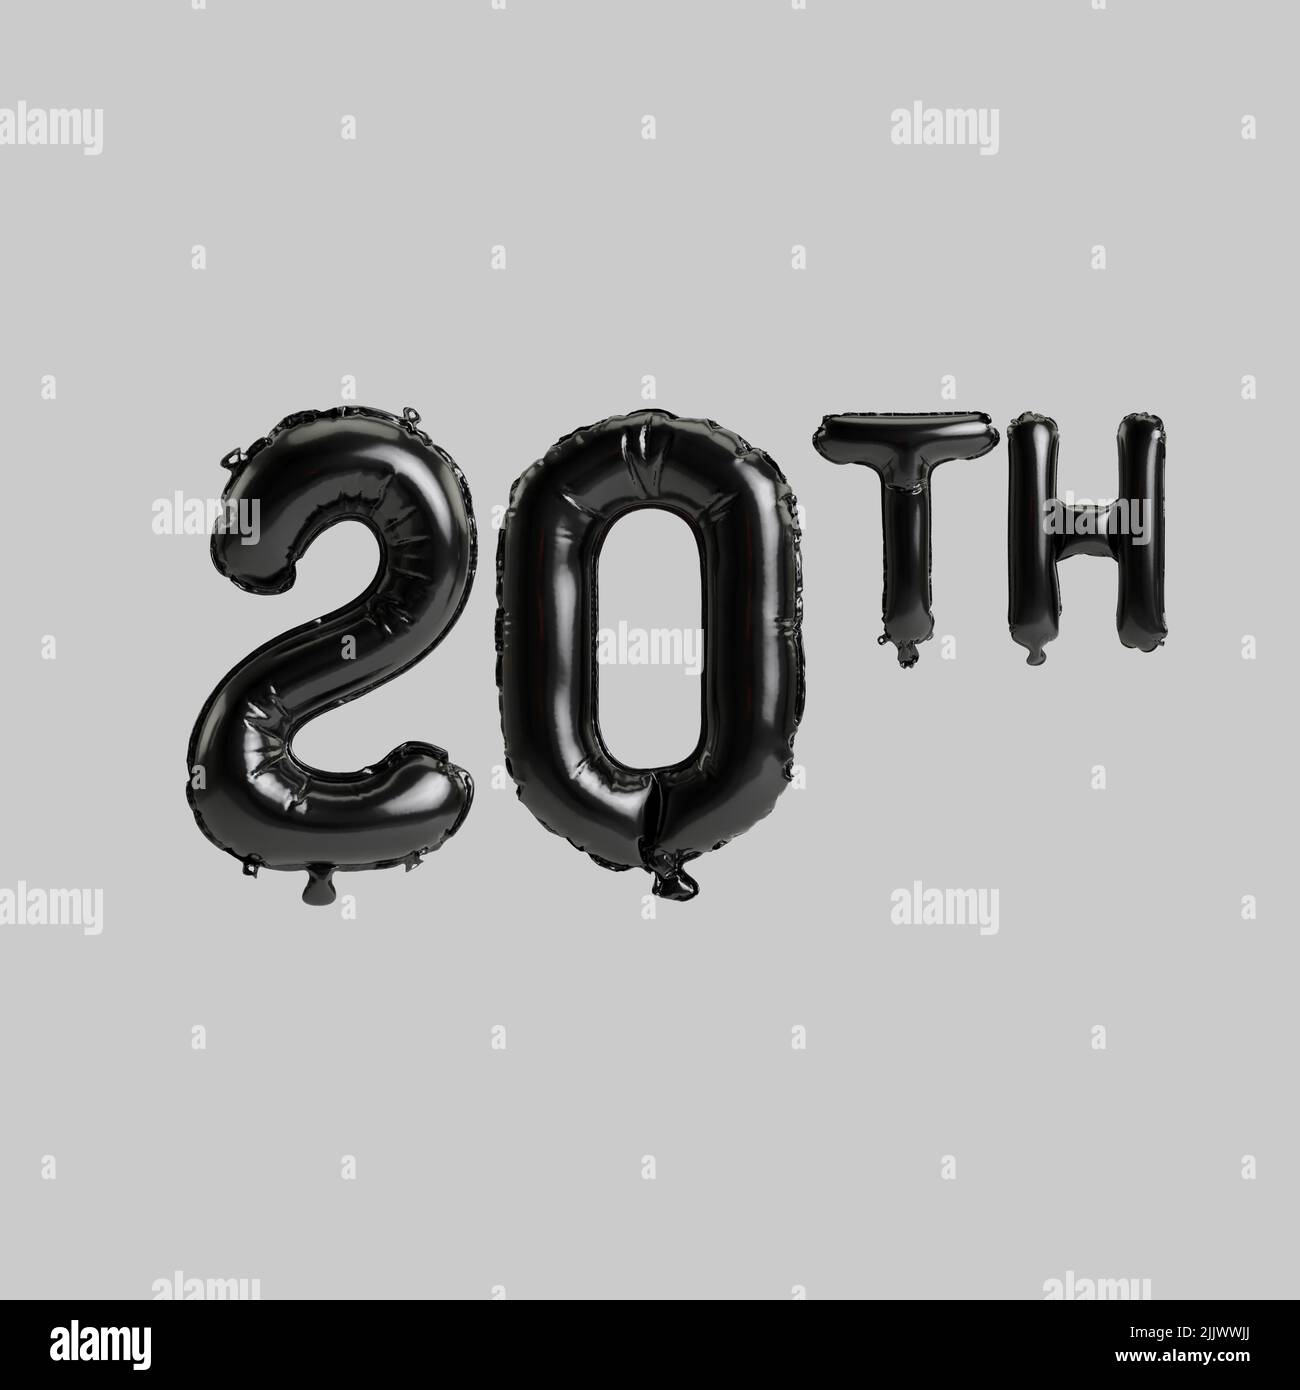 3d illustration of 20th black balloons isolated on white background Stock Photo